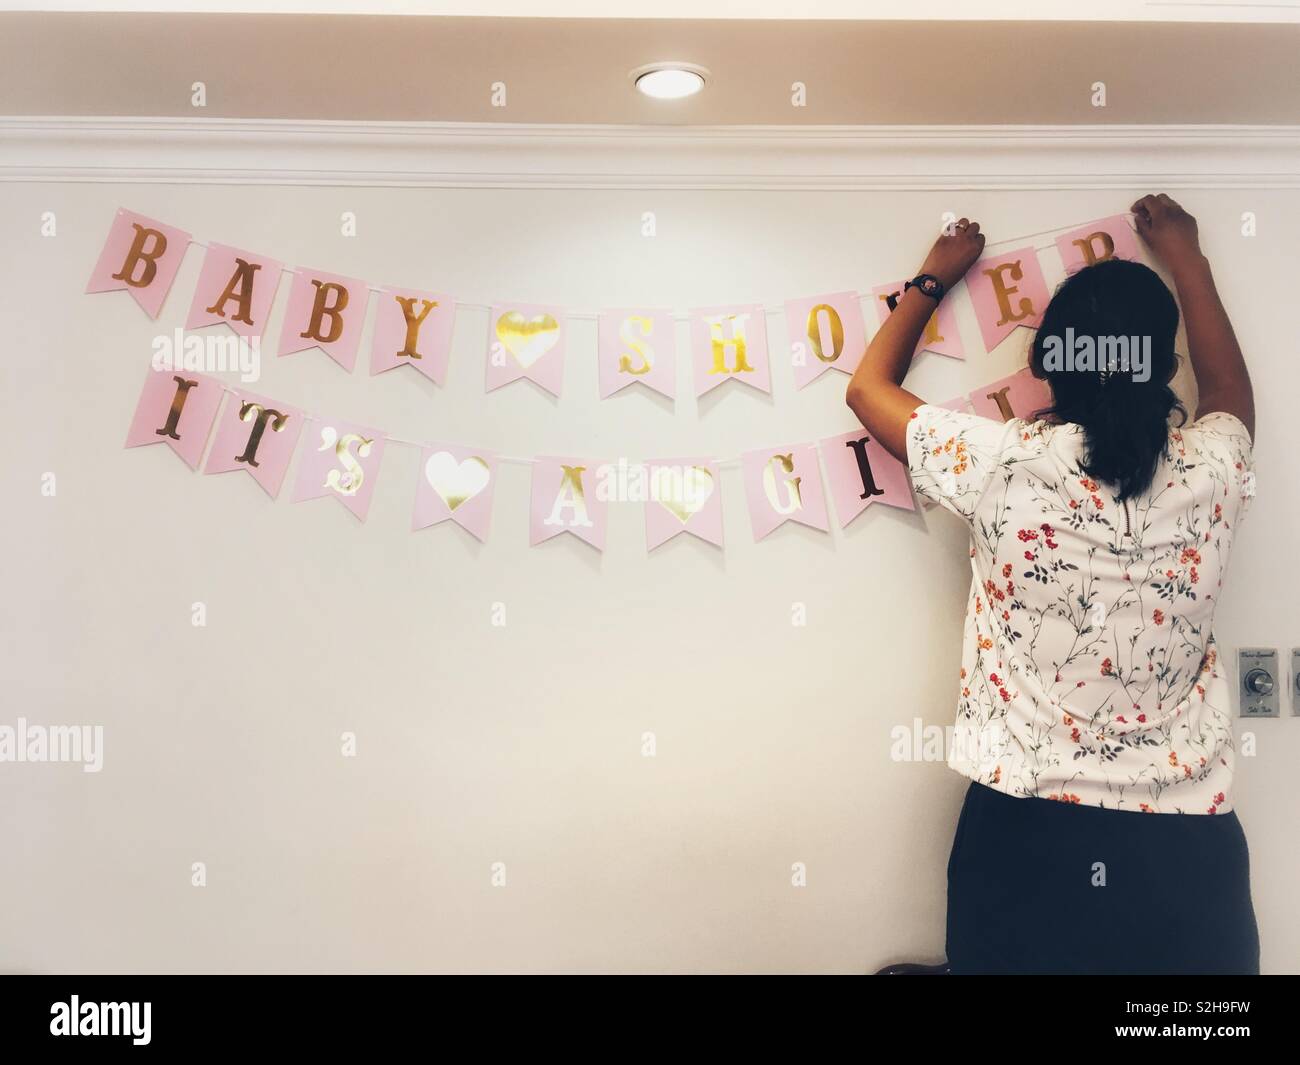 A woman decorating room for a Baby Shower Stock Photo